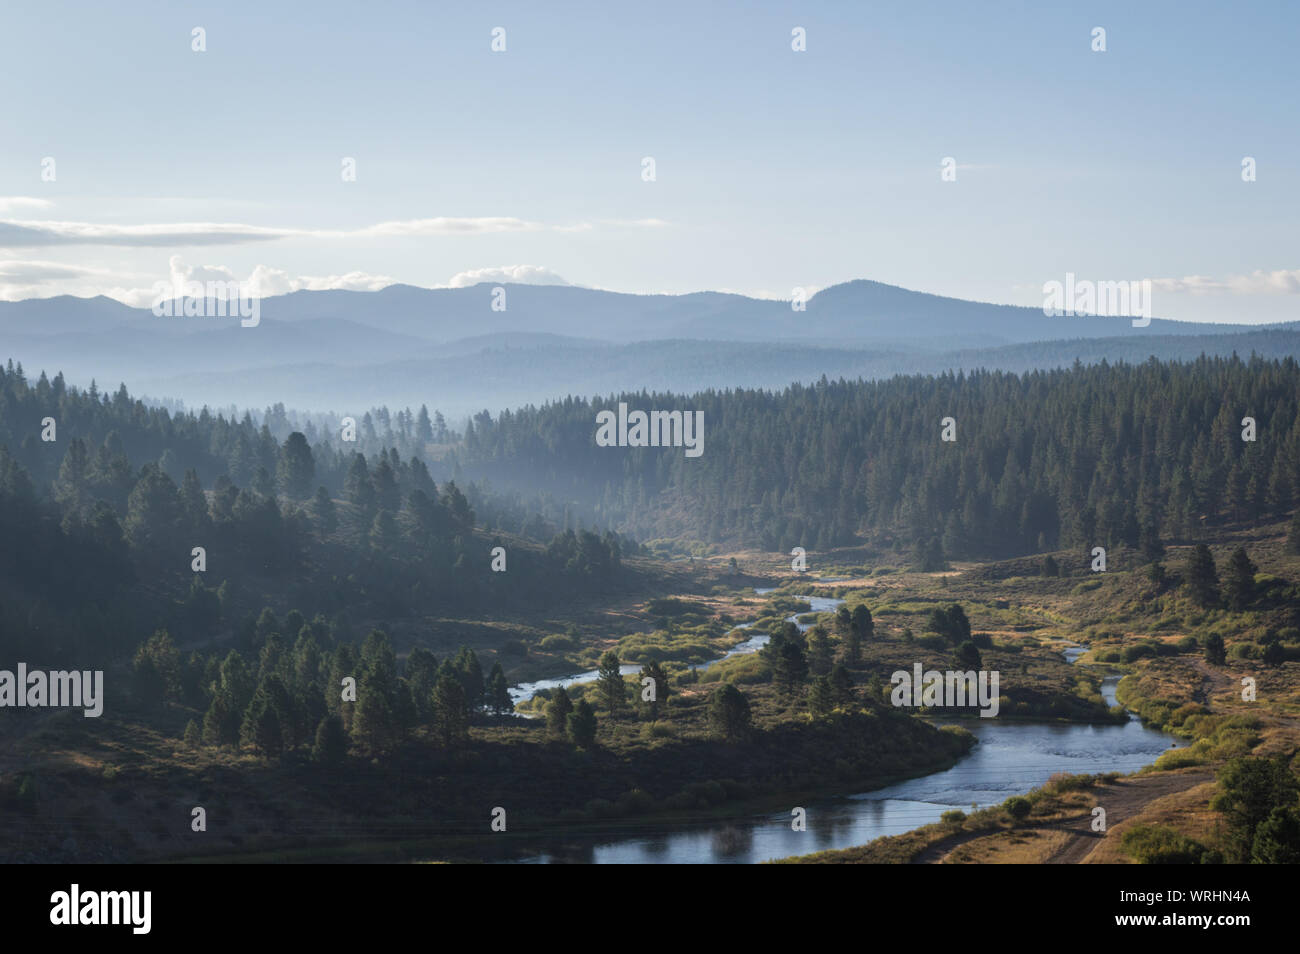 A beautiful landscape from the lesser-known public land at Prosser Reservoir in Truckee near Lake Tahoe during the early morning in late summer. Stock Photo